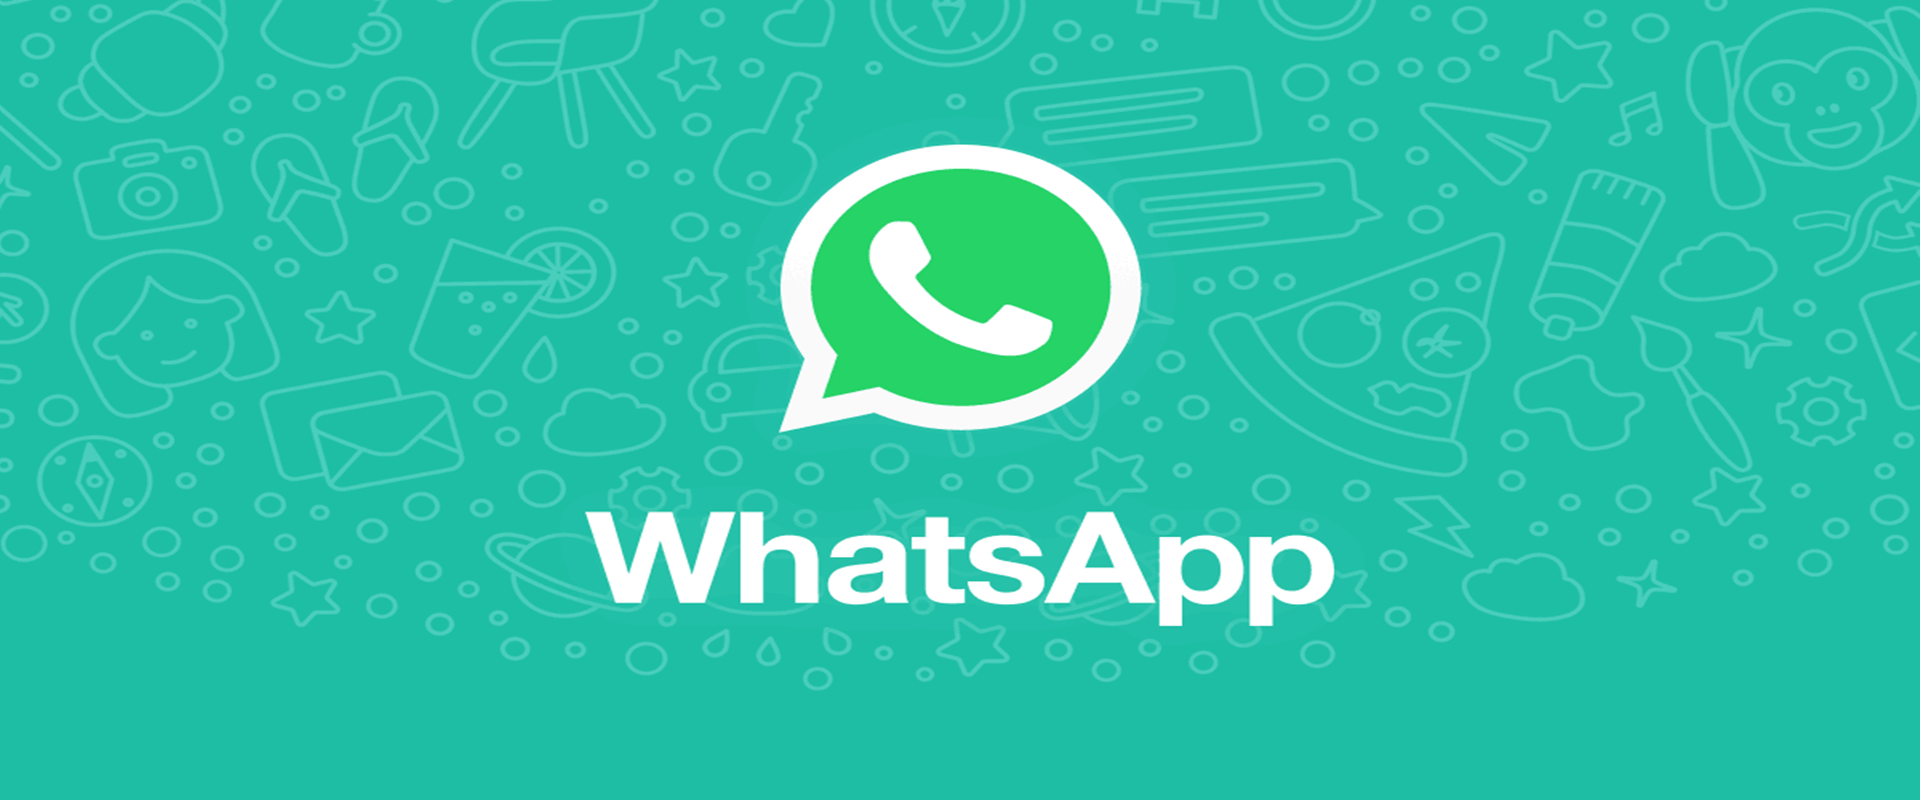 whatsapp messenger for laptop free download for windows 7